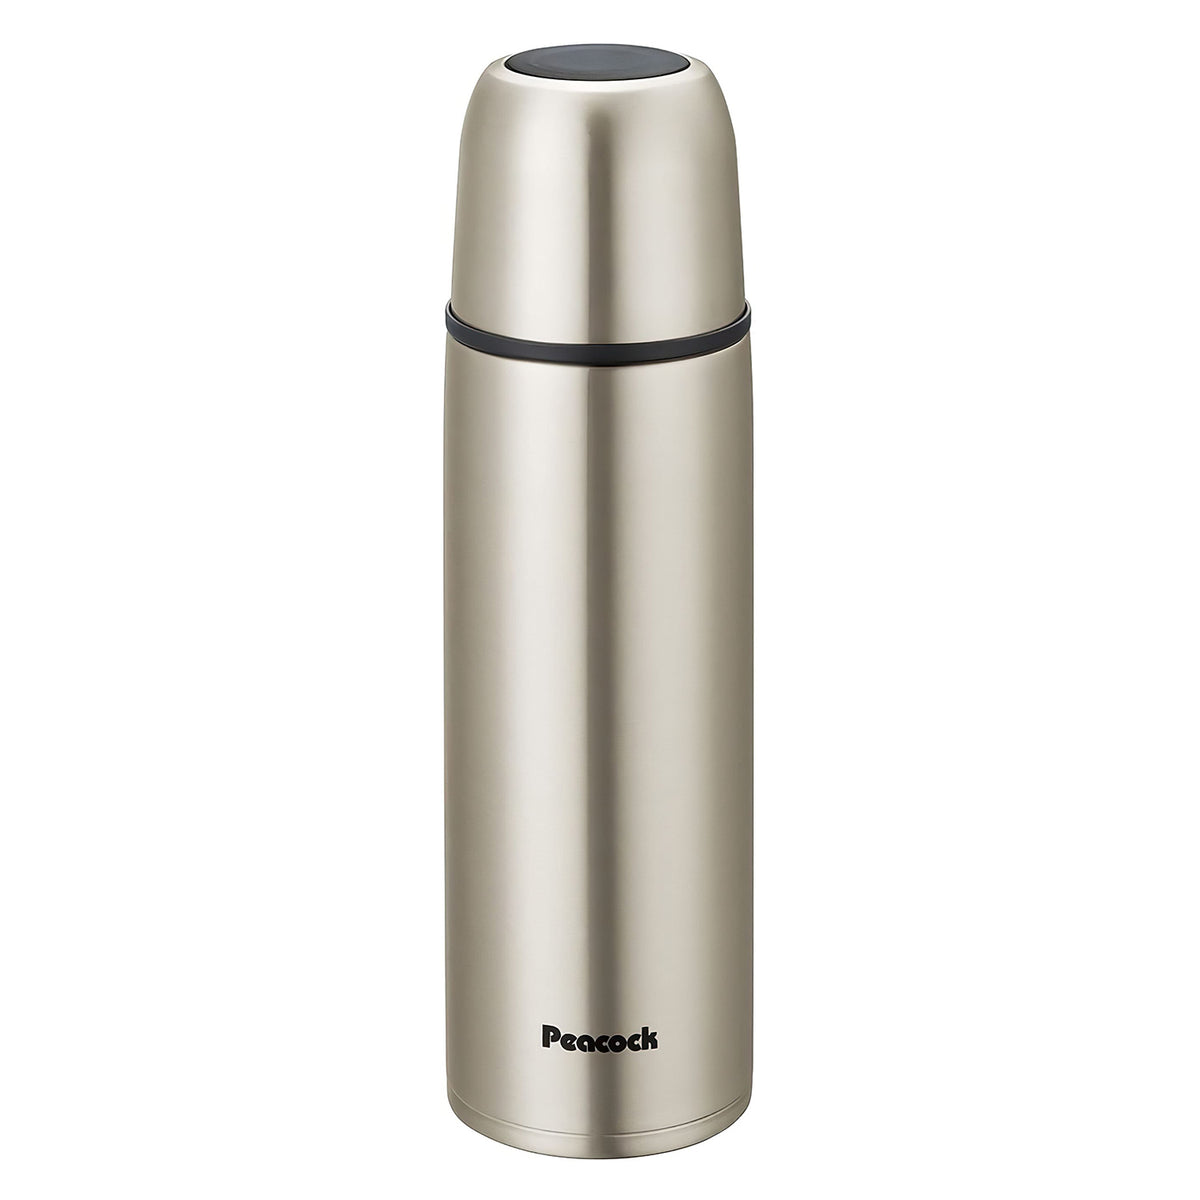 Paraguay Bolivia Big Flask Water Coffee Dispenser Stainless Steel